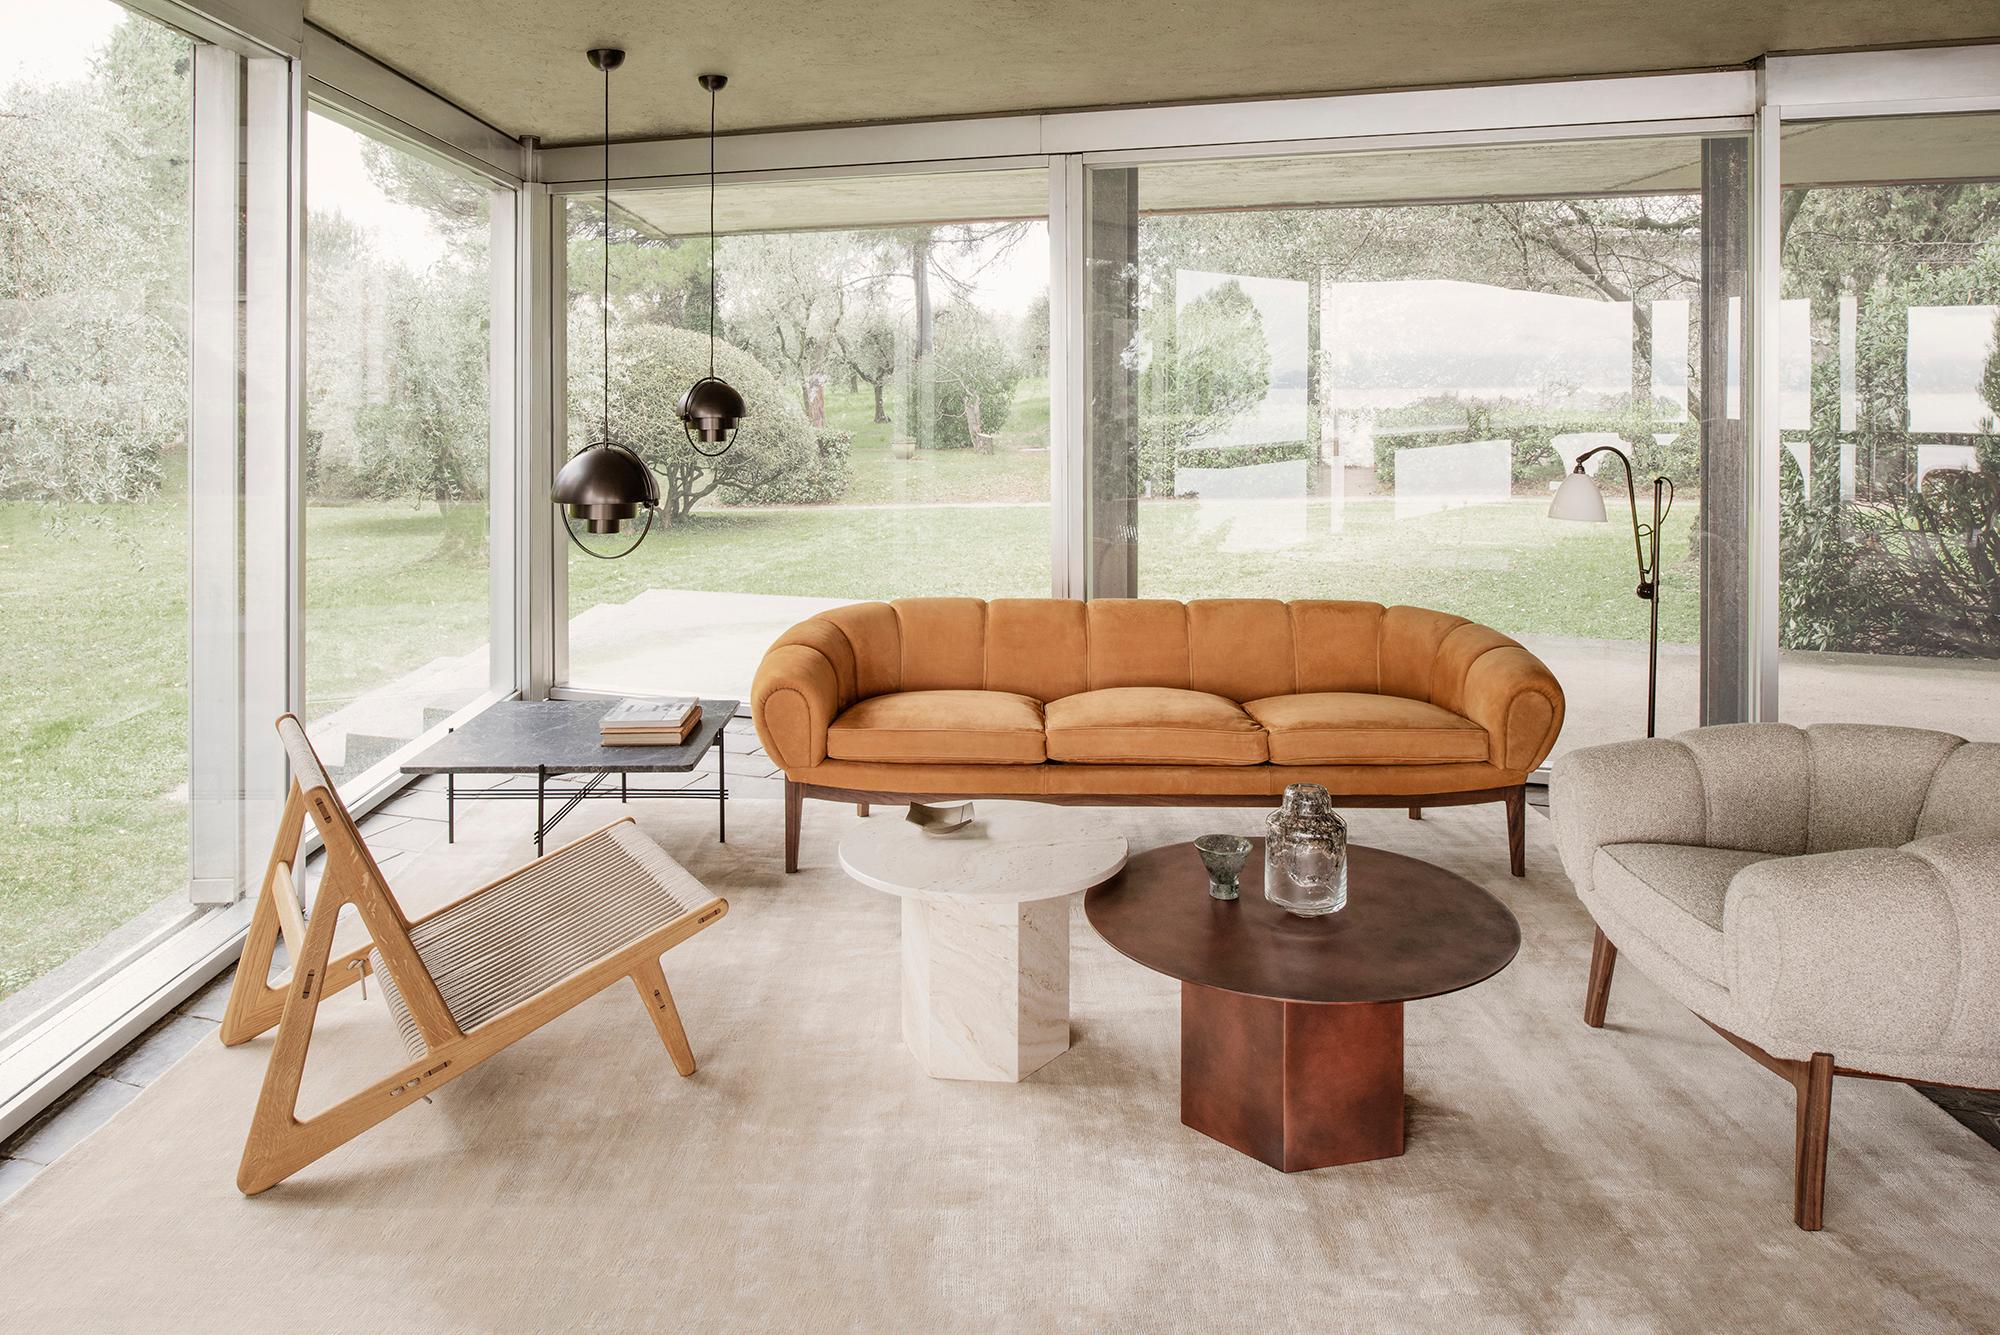 Contemporary Leather 'Croissant' Sofa by Illum Wikkelsø for Gubi with Walnut Legs For Sale